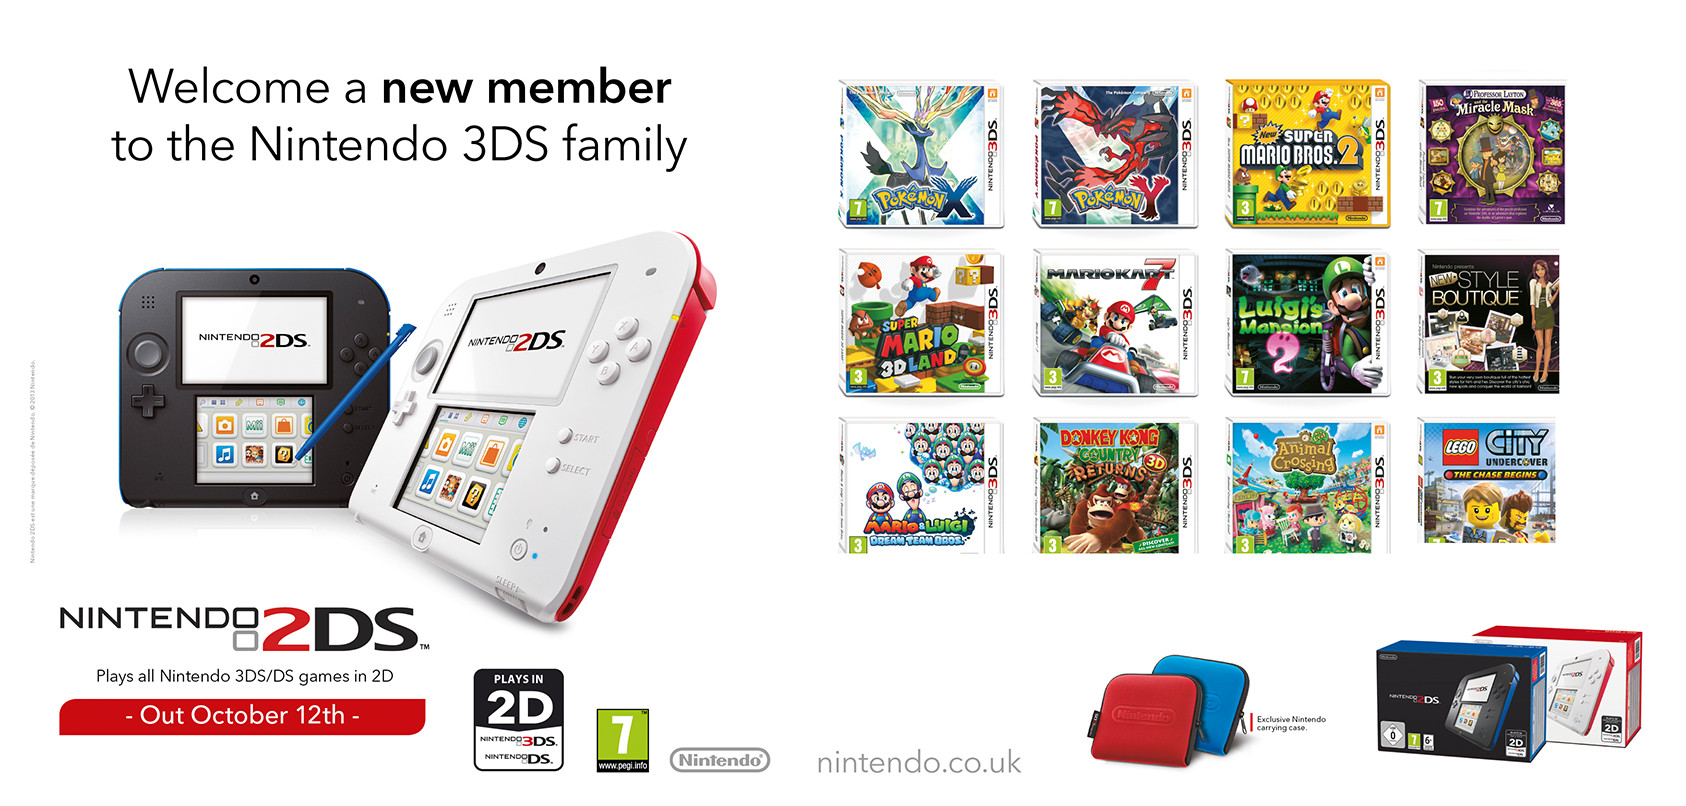 Nintendo UK on Twitter: "We welcome a member to the Nintendo 3DS family: Nintendo #2DS arrives on 12/10 and all 3DS&amp;DS games in 2D. / Twitter